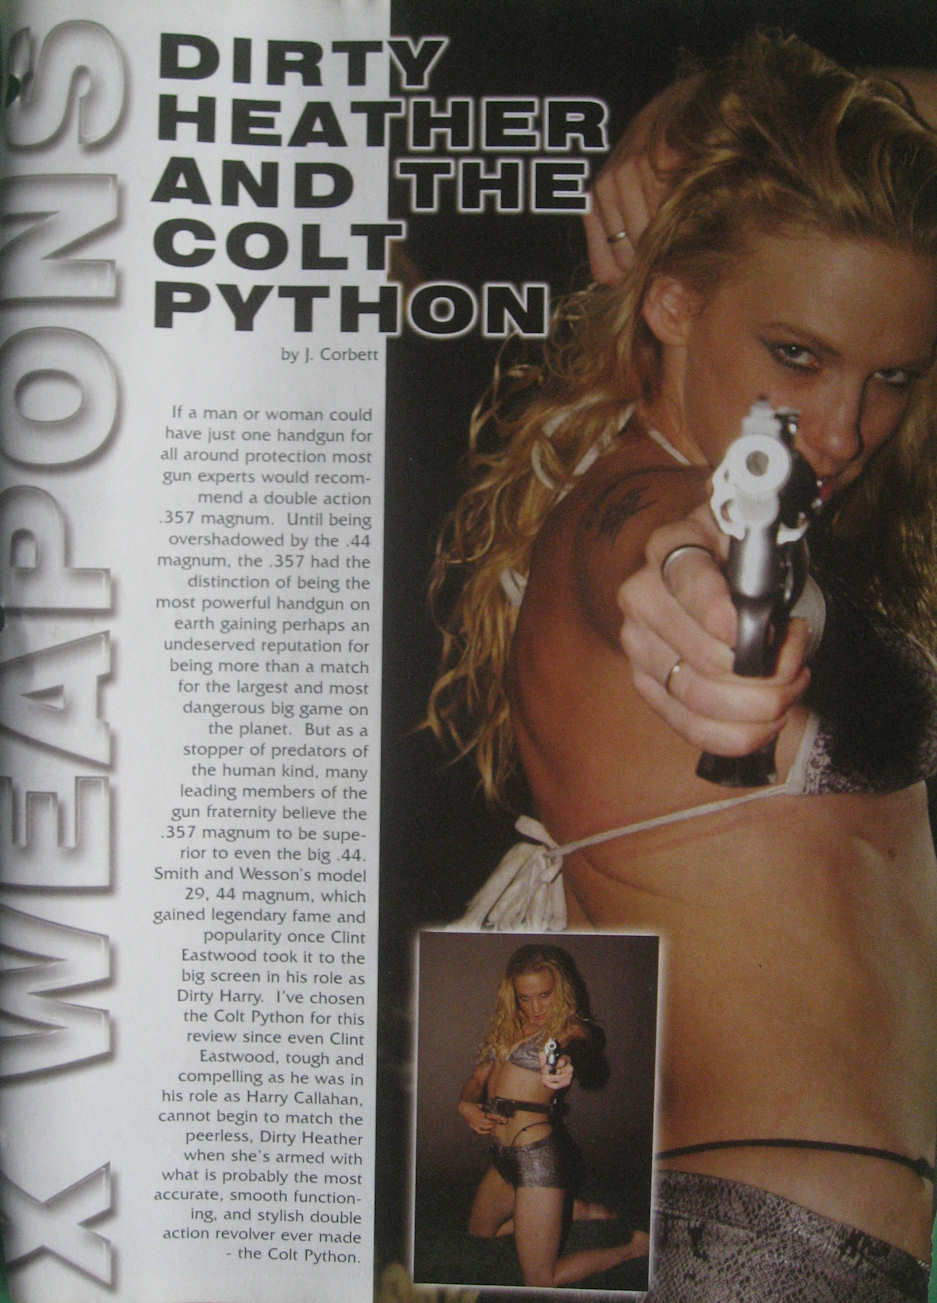 Xtreme Magazine gun article Dirty Heather and the Colt Python